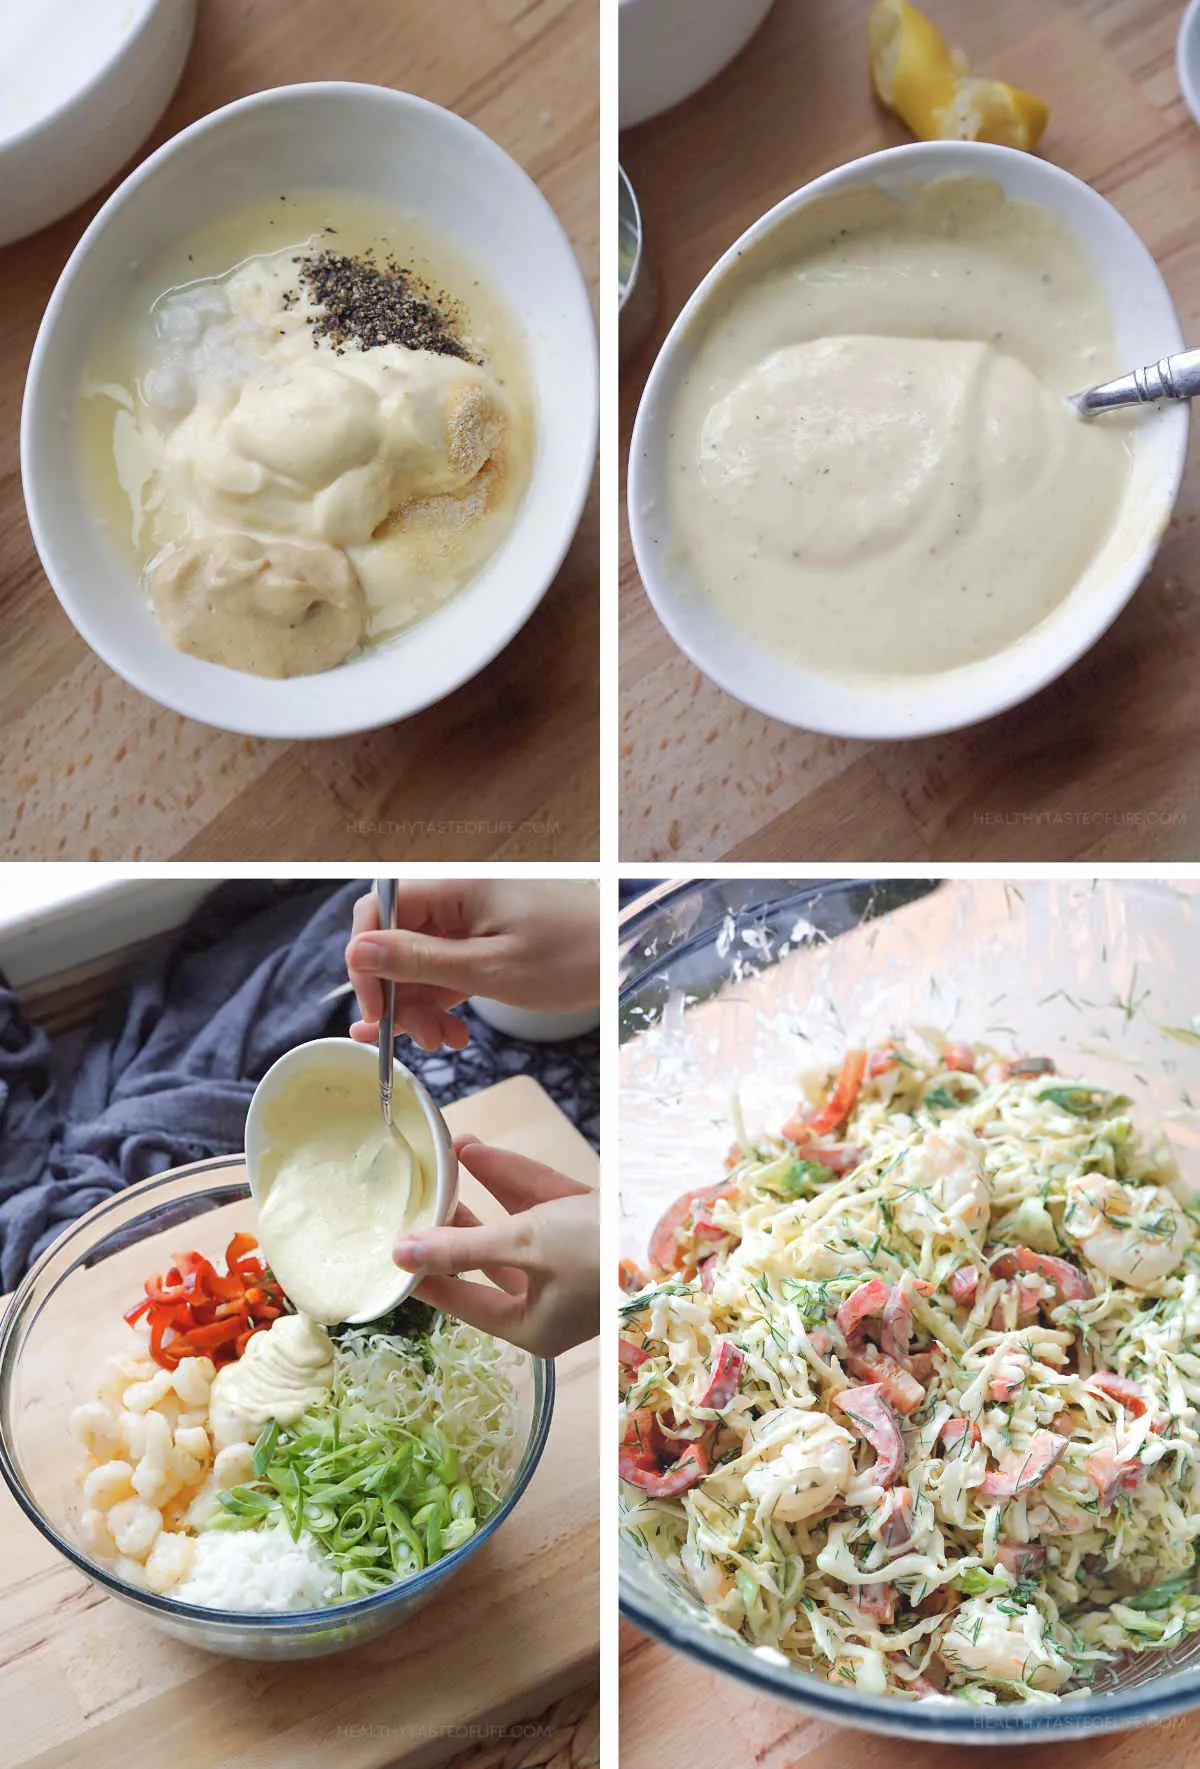 Process shots showing how to make the creamy dressing, combine the salad ingredients in a bowl tossed together to form the salad.